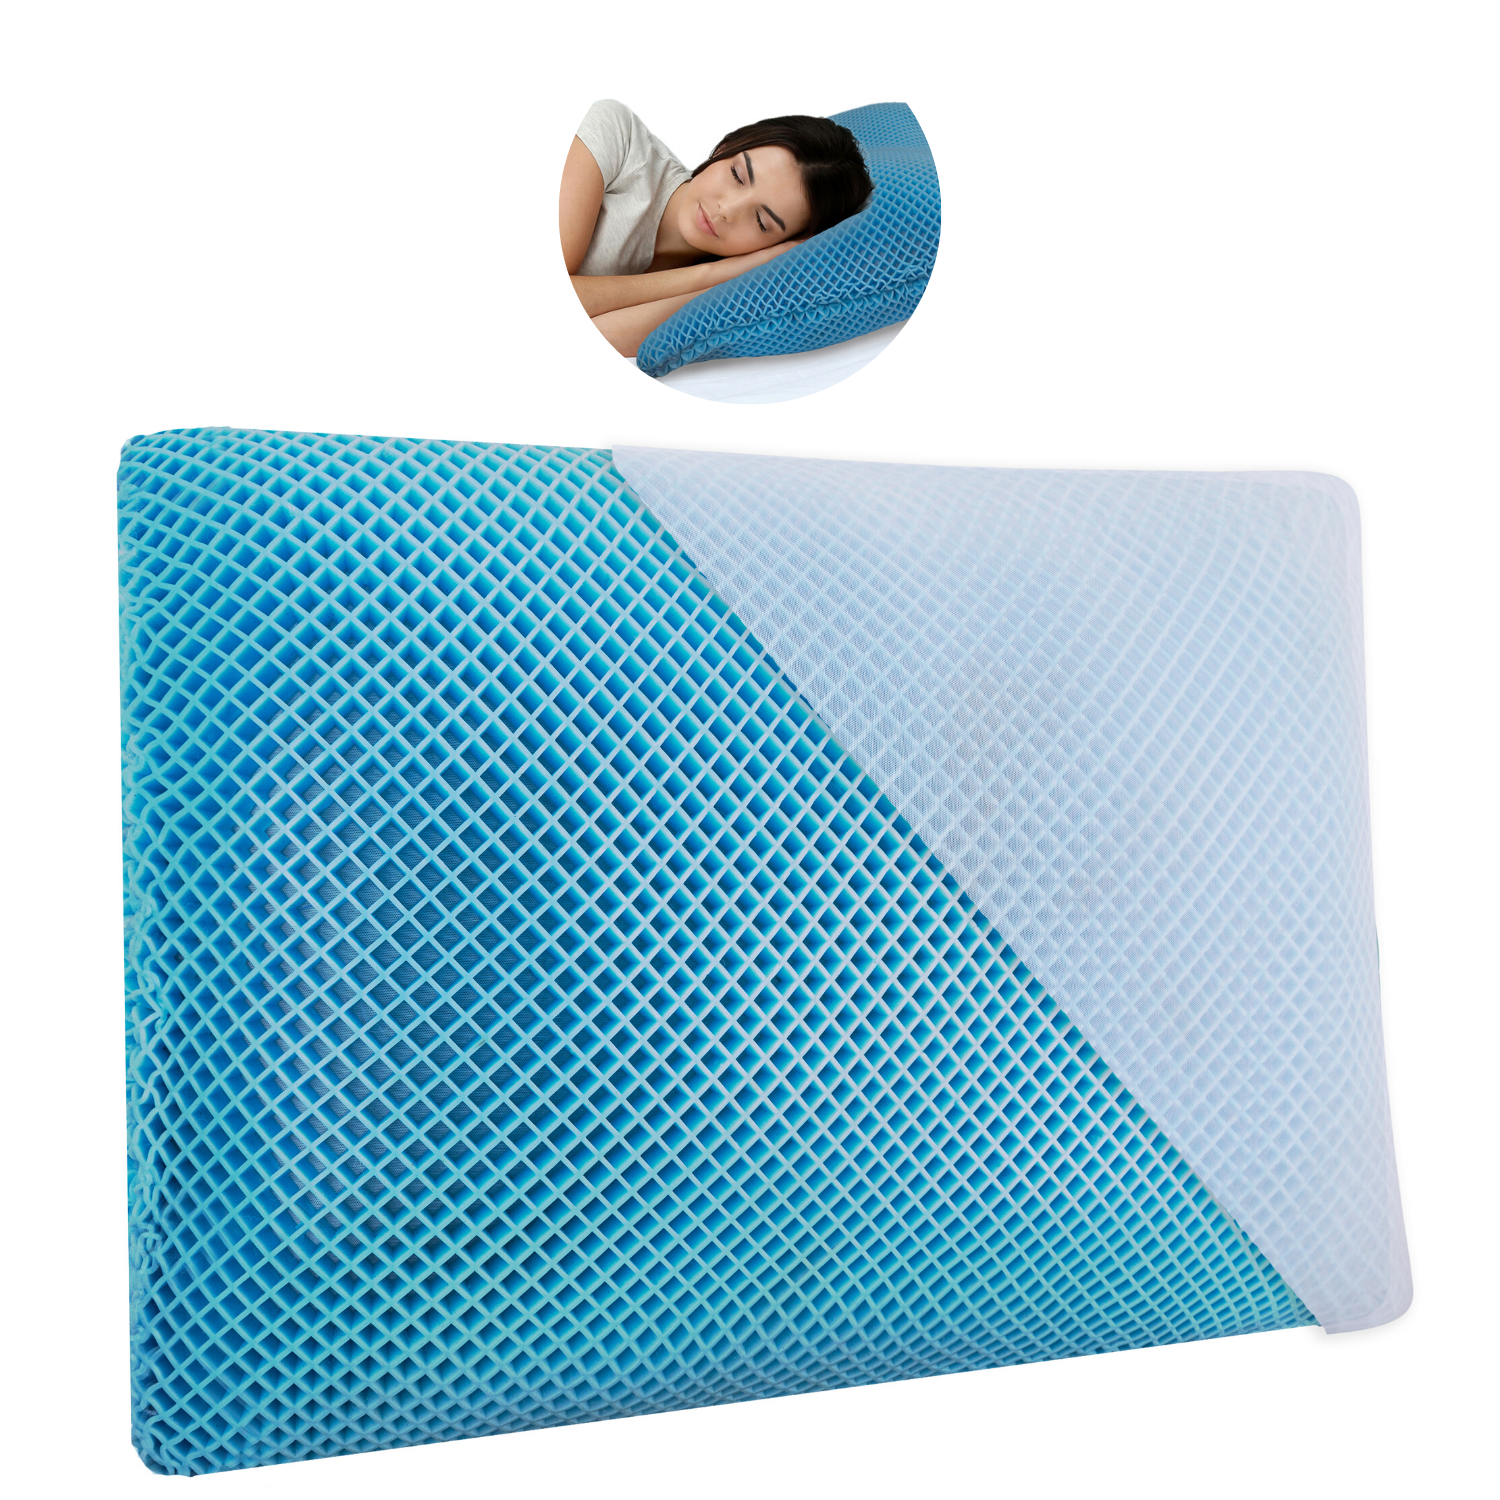 Groye Ultra Cooling Pillow with Gel Particles Shredded Memory Foam